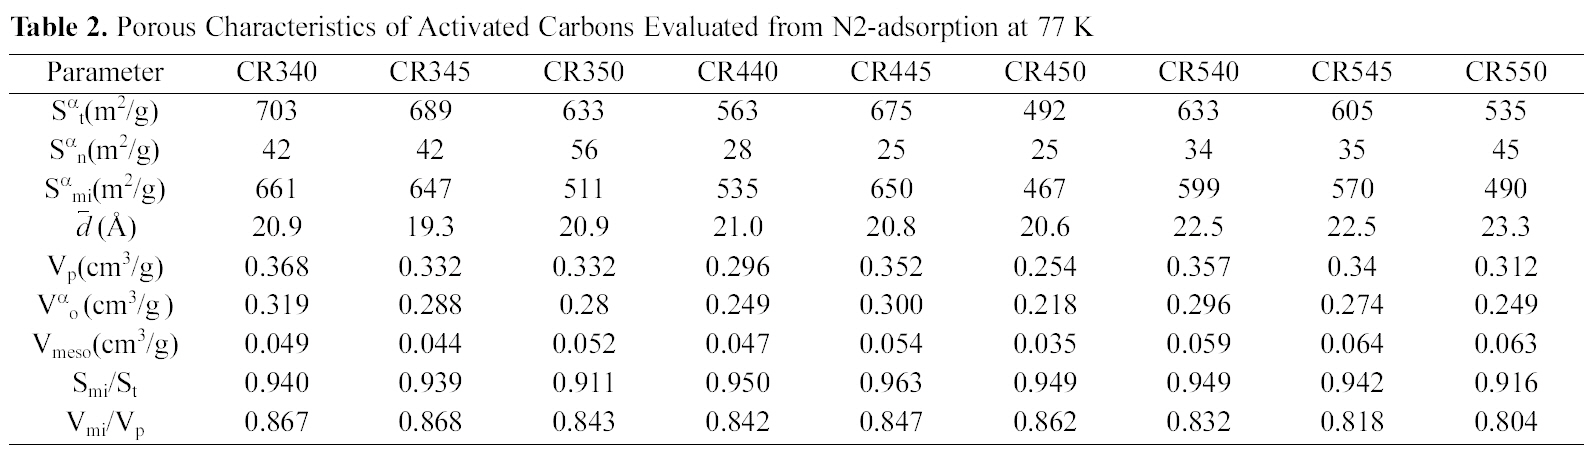 Porous Characteristics of Activated Carbons Evaluated from N2-adsorption at 77 K